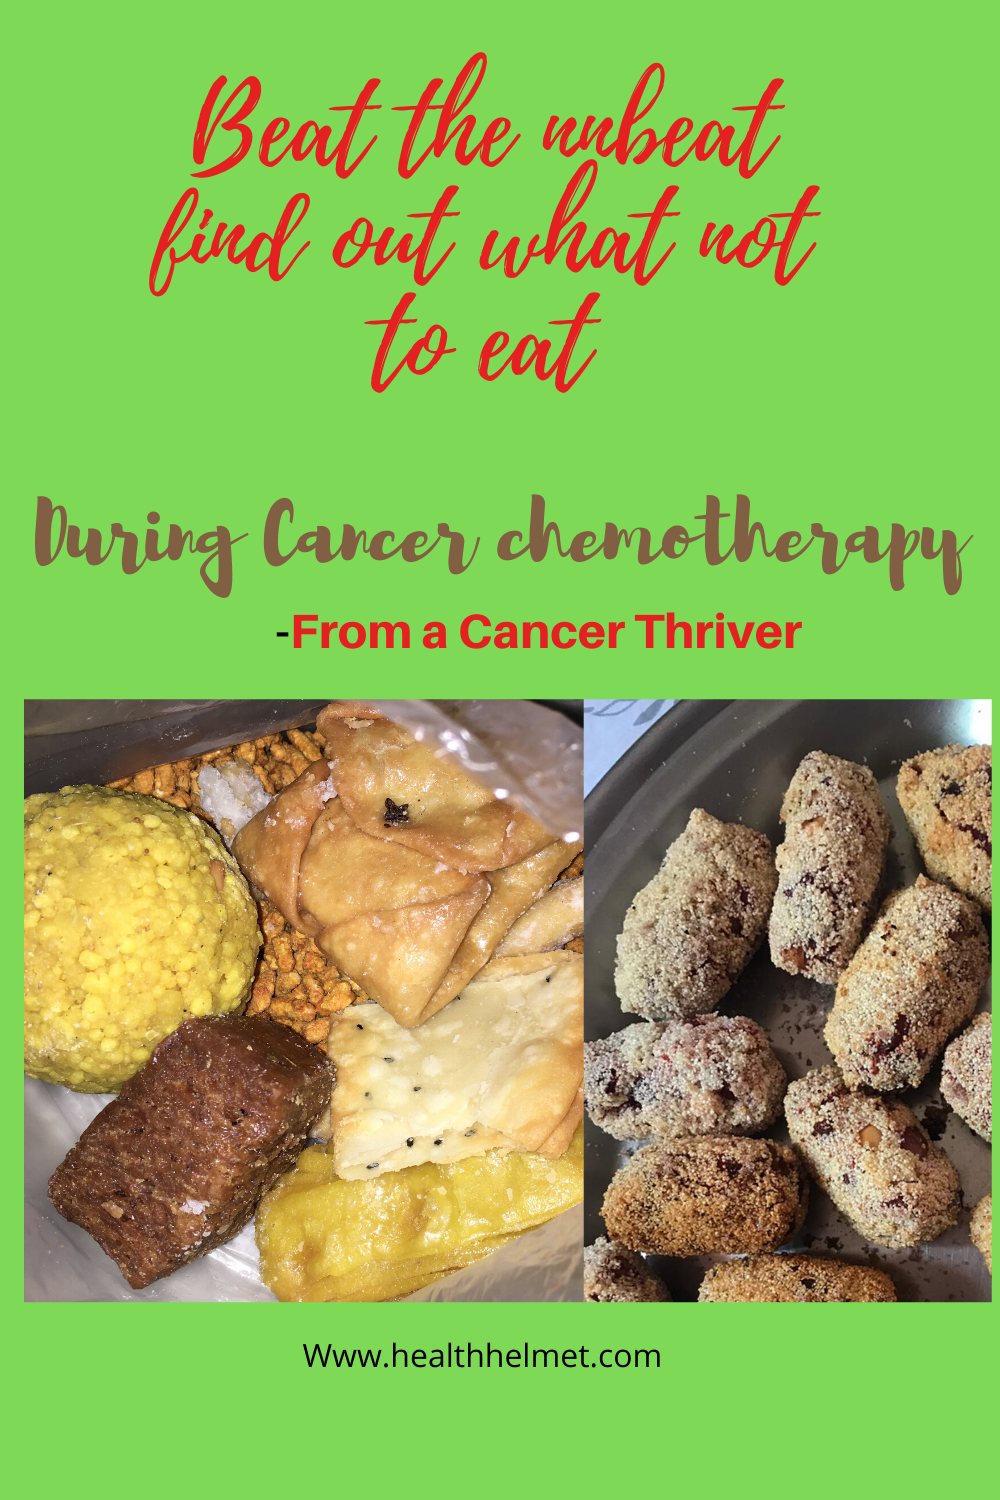 Foods-not-to-eat-during-chemotherapy